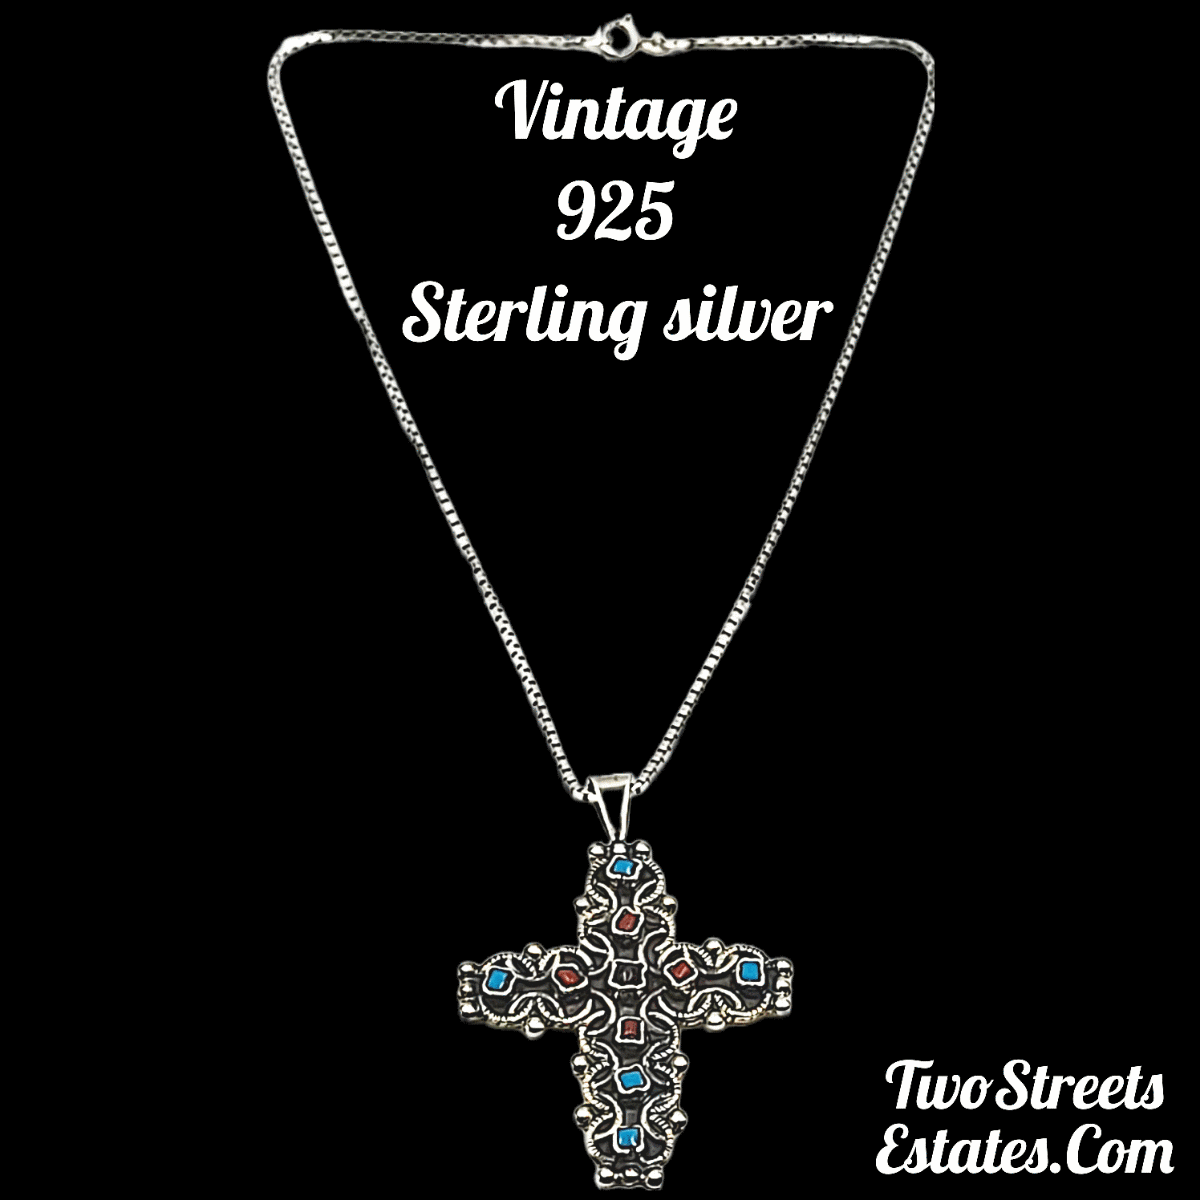 Vintage 925 Sterling Turquoise & Coral Cross Pendant (w) Box Chain